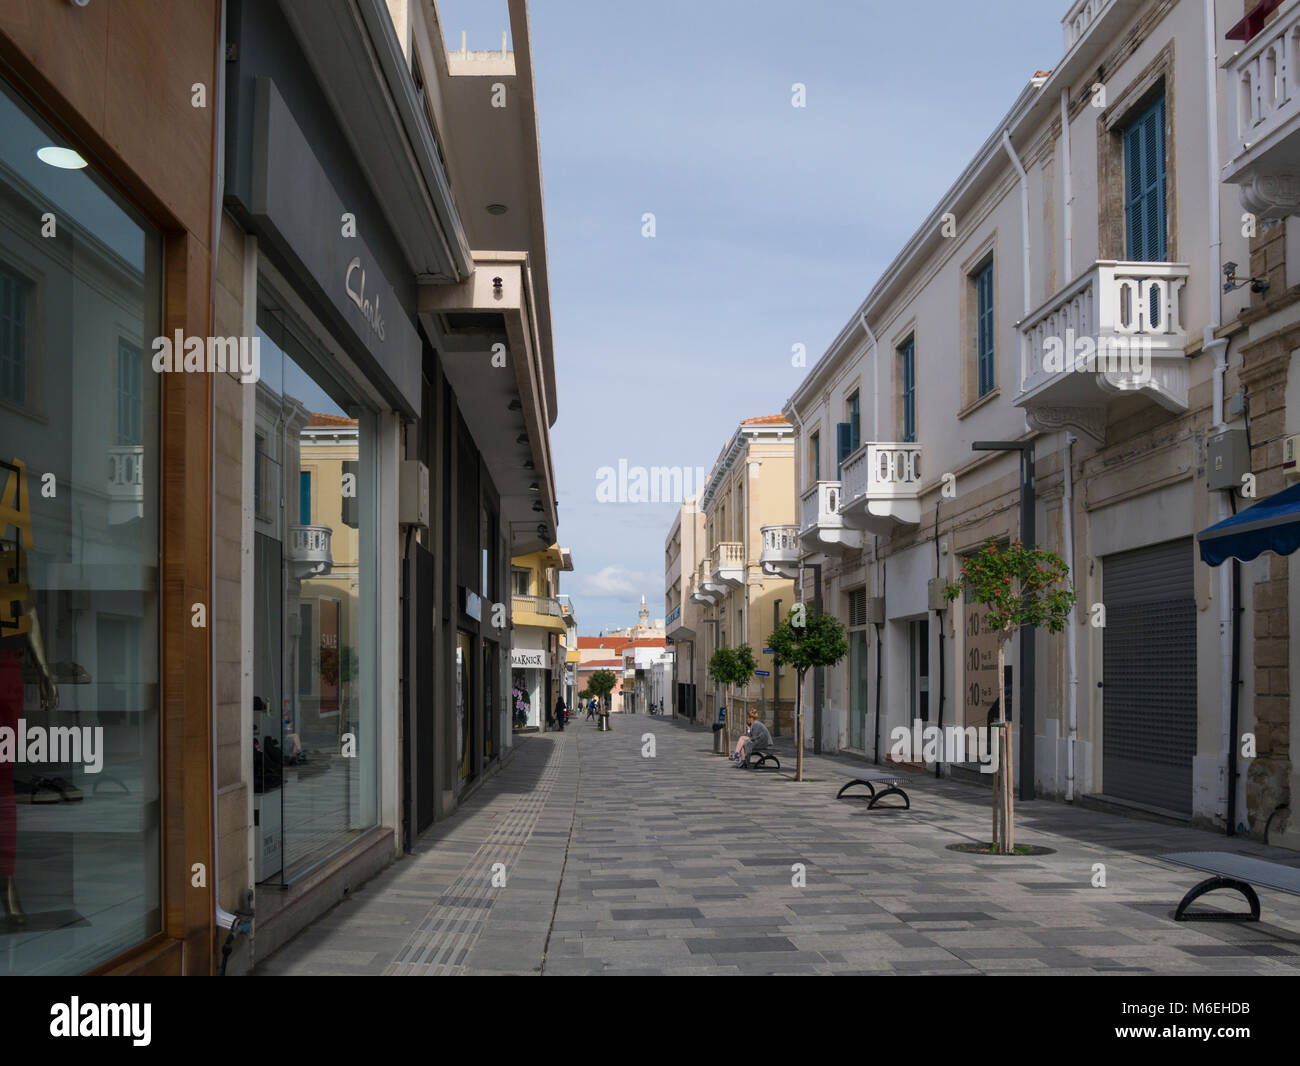 One of the pedestrianised shopping streets in the Old Market Area of Pano Pafos Upper Paphos South Cyprus in Turkish Quarter Stock Photo